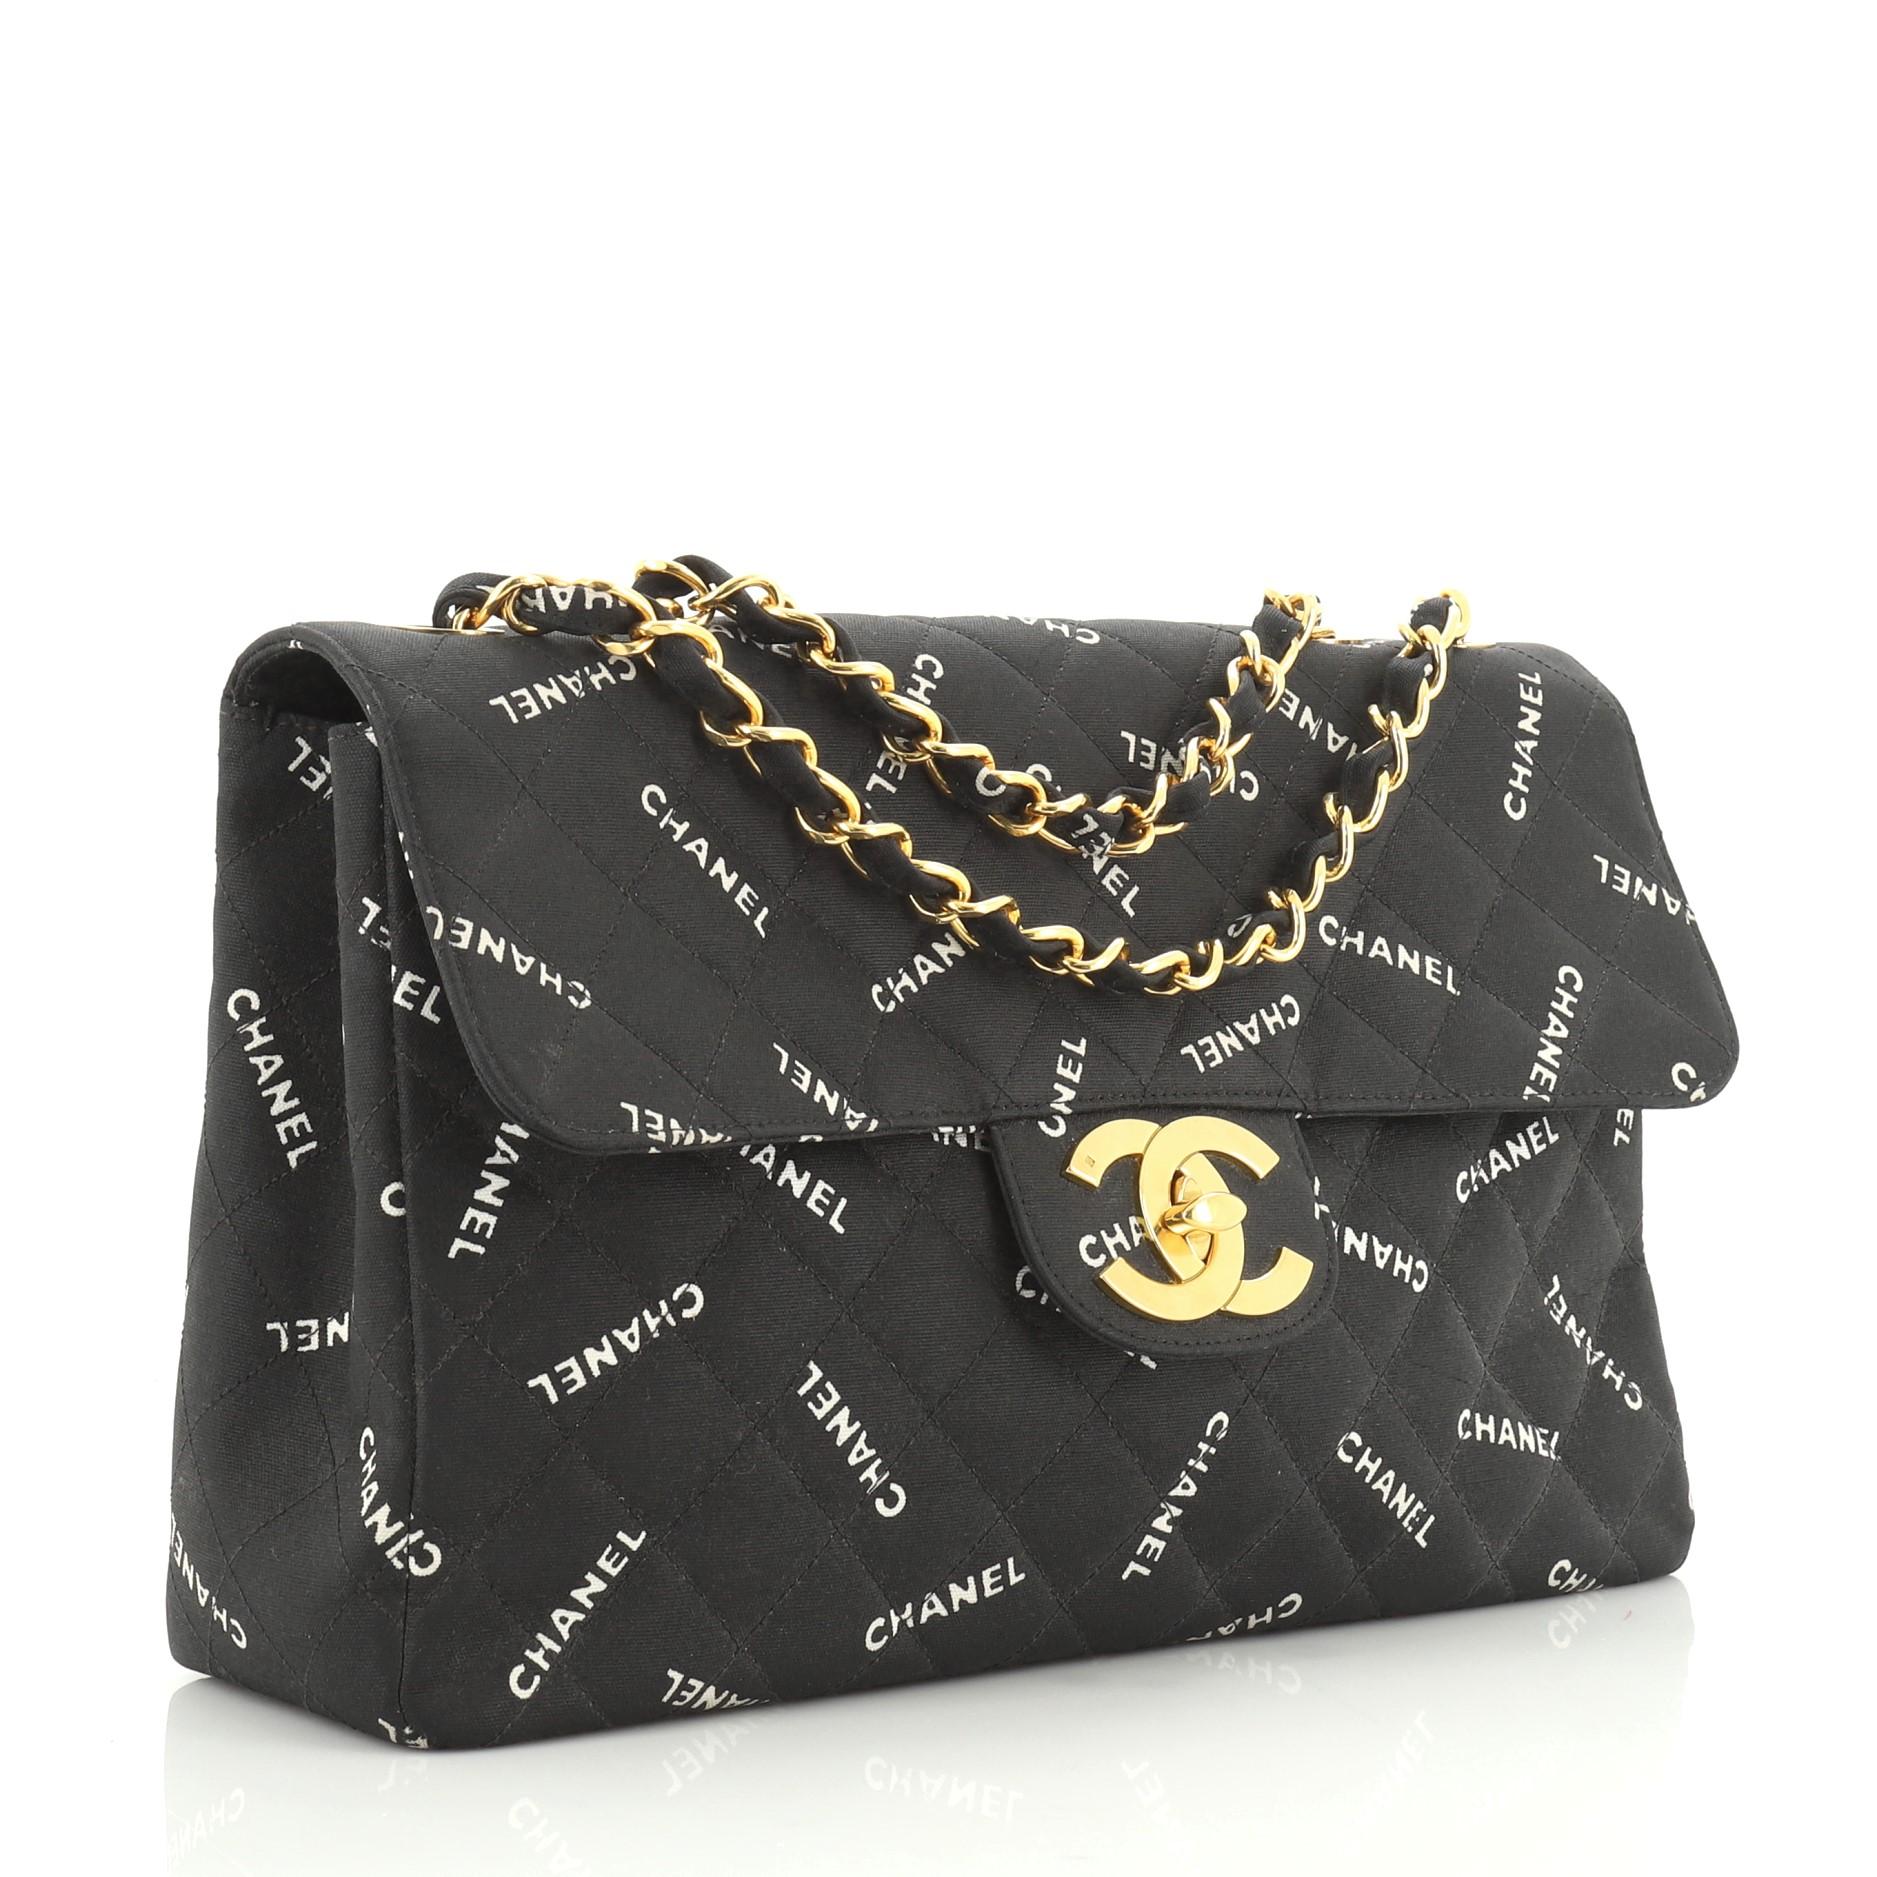 This Chanel Vintage Classic Single Flap Bag Quilted Printed Canvas Maxi, crafted in black quilted printed canvas, features woven-in canvas chain link straps, exterior back slip pocket, and gold-tone hardware. Its CC turn-lock closure opens to a